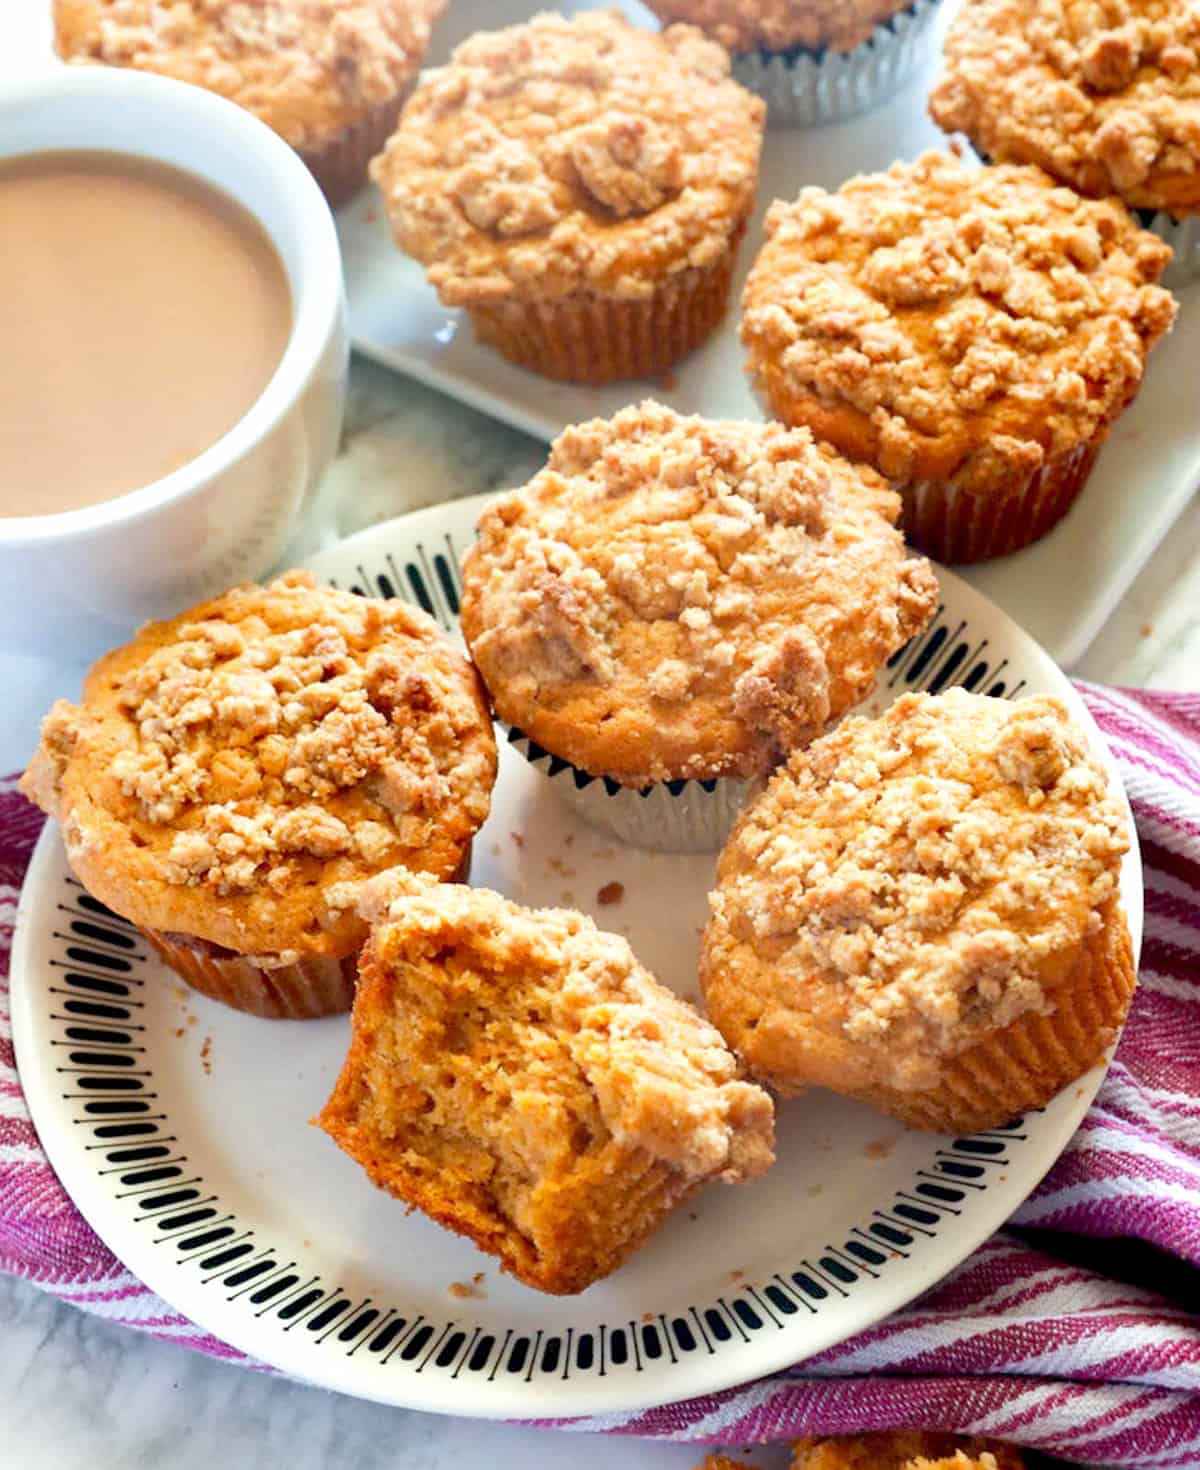 Freshly baked sweet potato muffins with streusel topping and hot coffee with cream